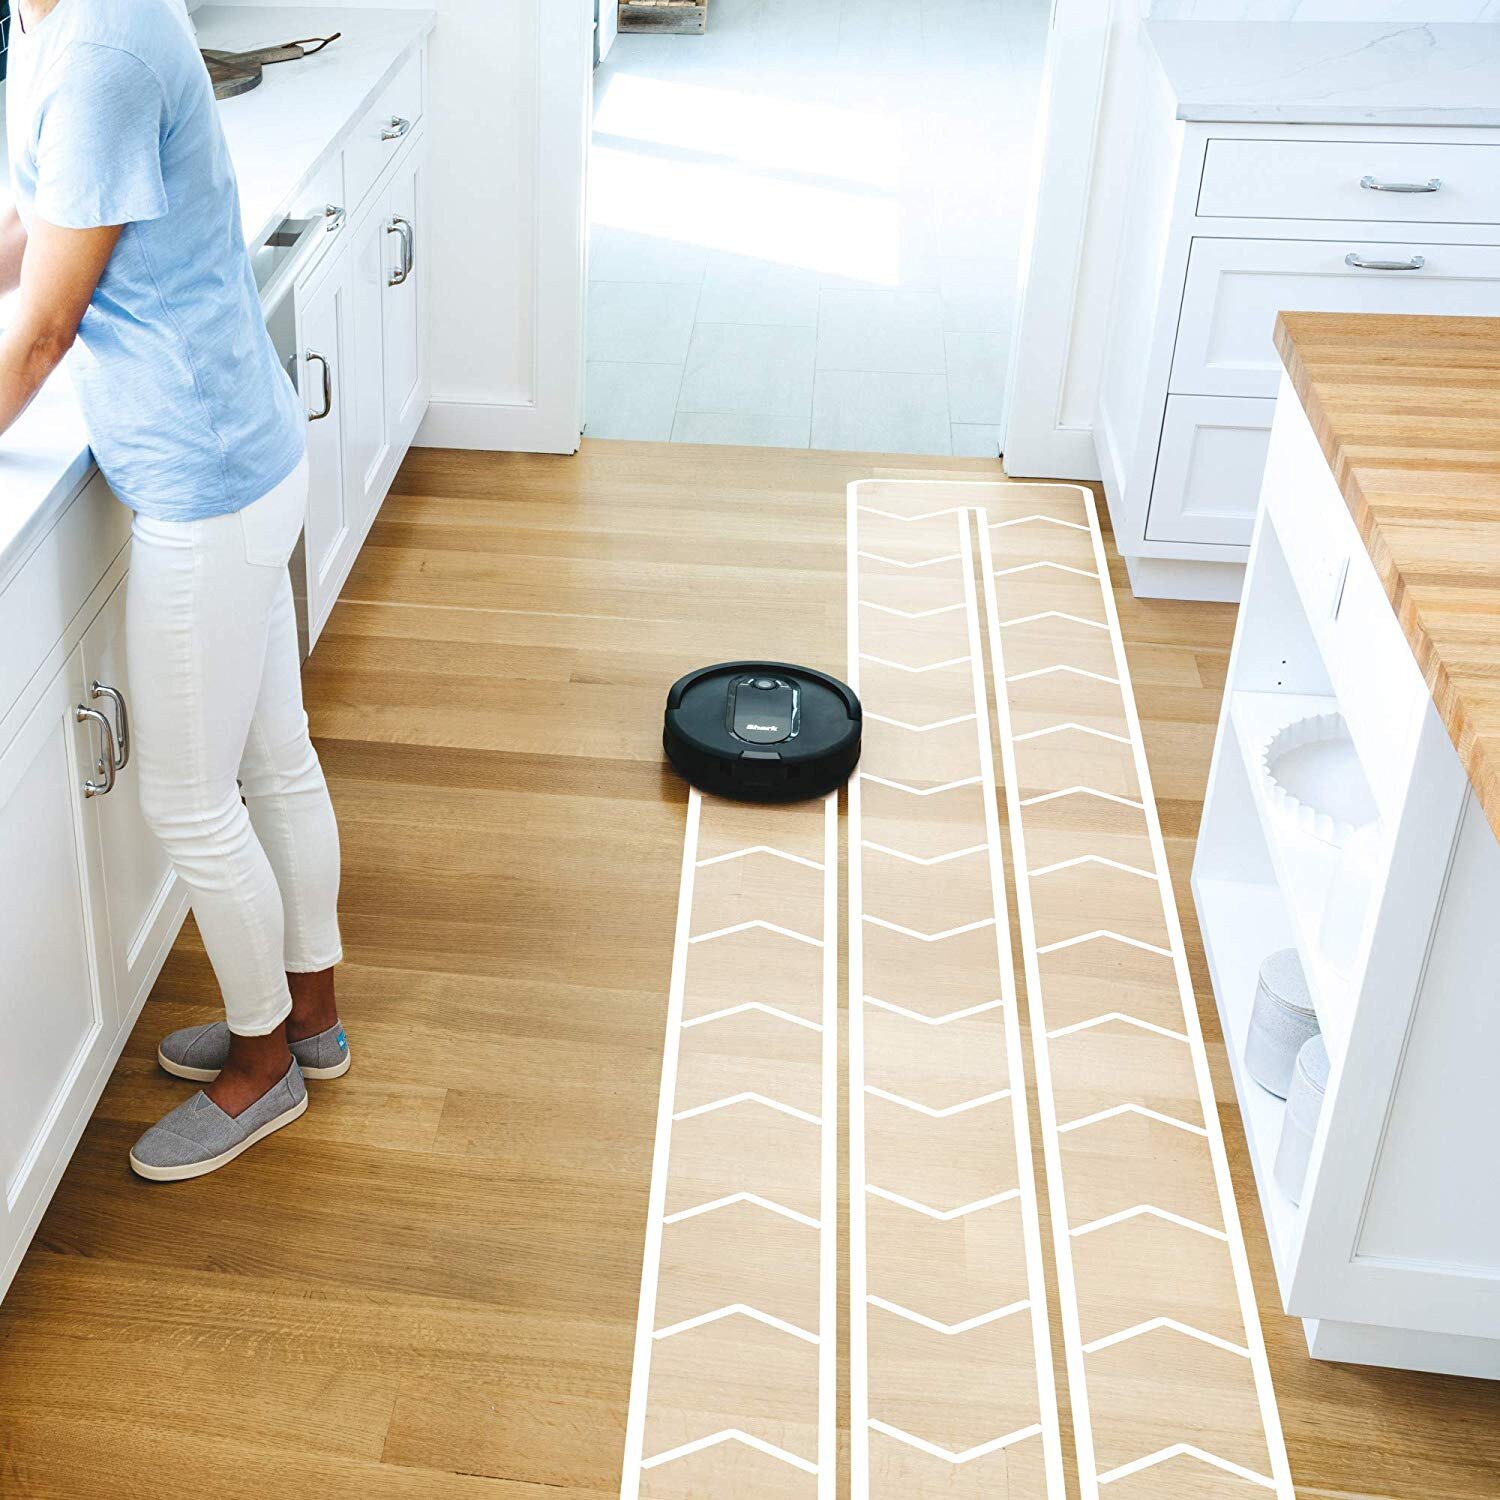 Best Robot Vacuums For Laminate Floors, Roomba For Laminate Floors